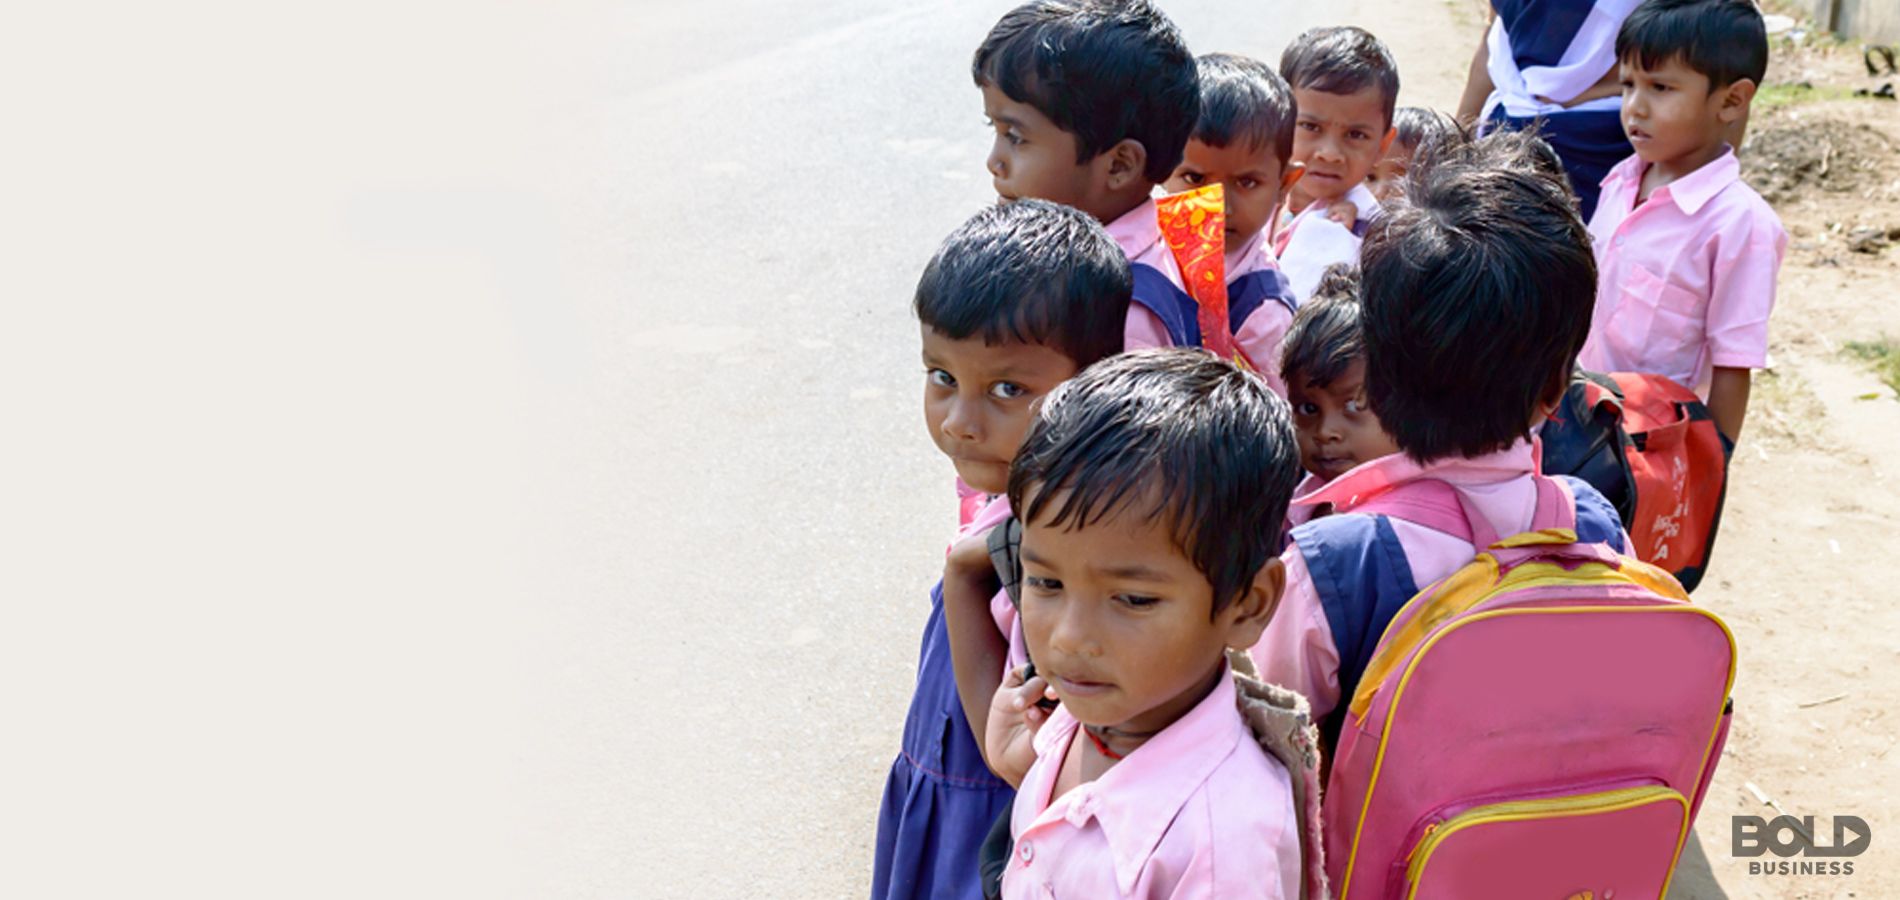 a group of children wearing backpacks and school uniforms - a picture of barriers to education